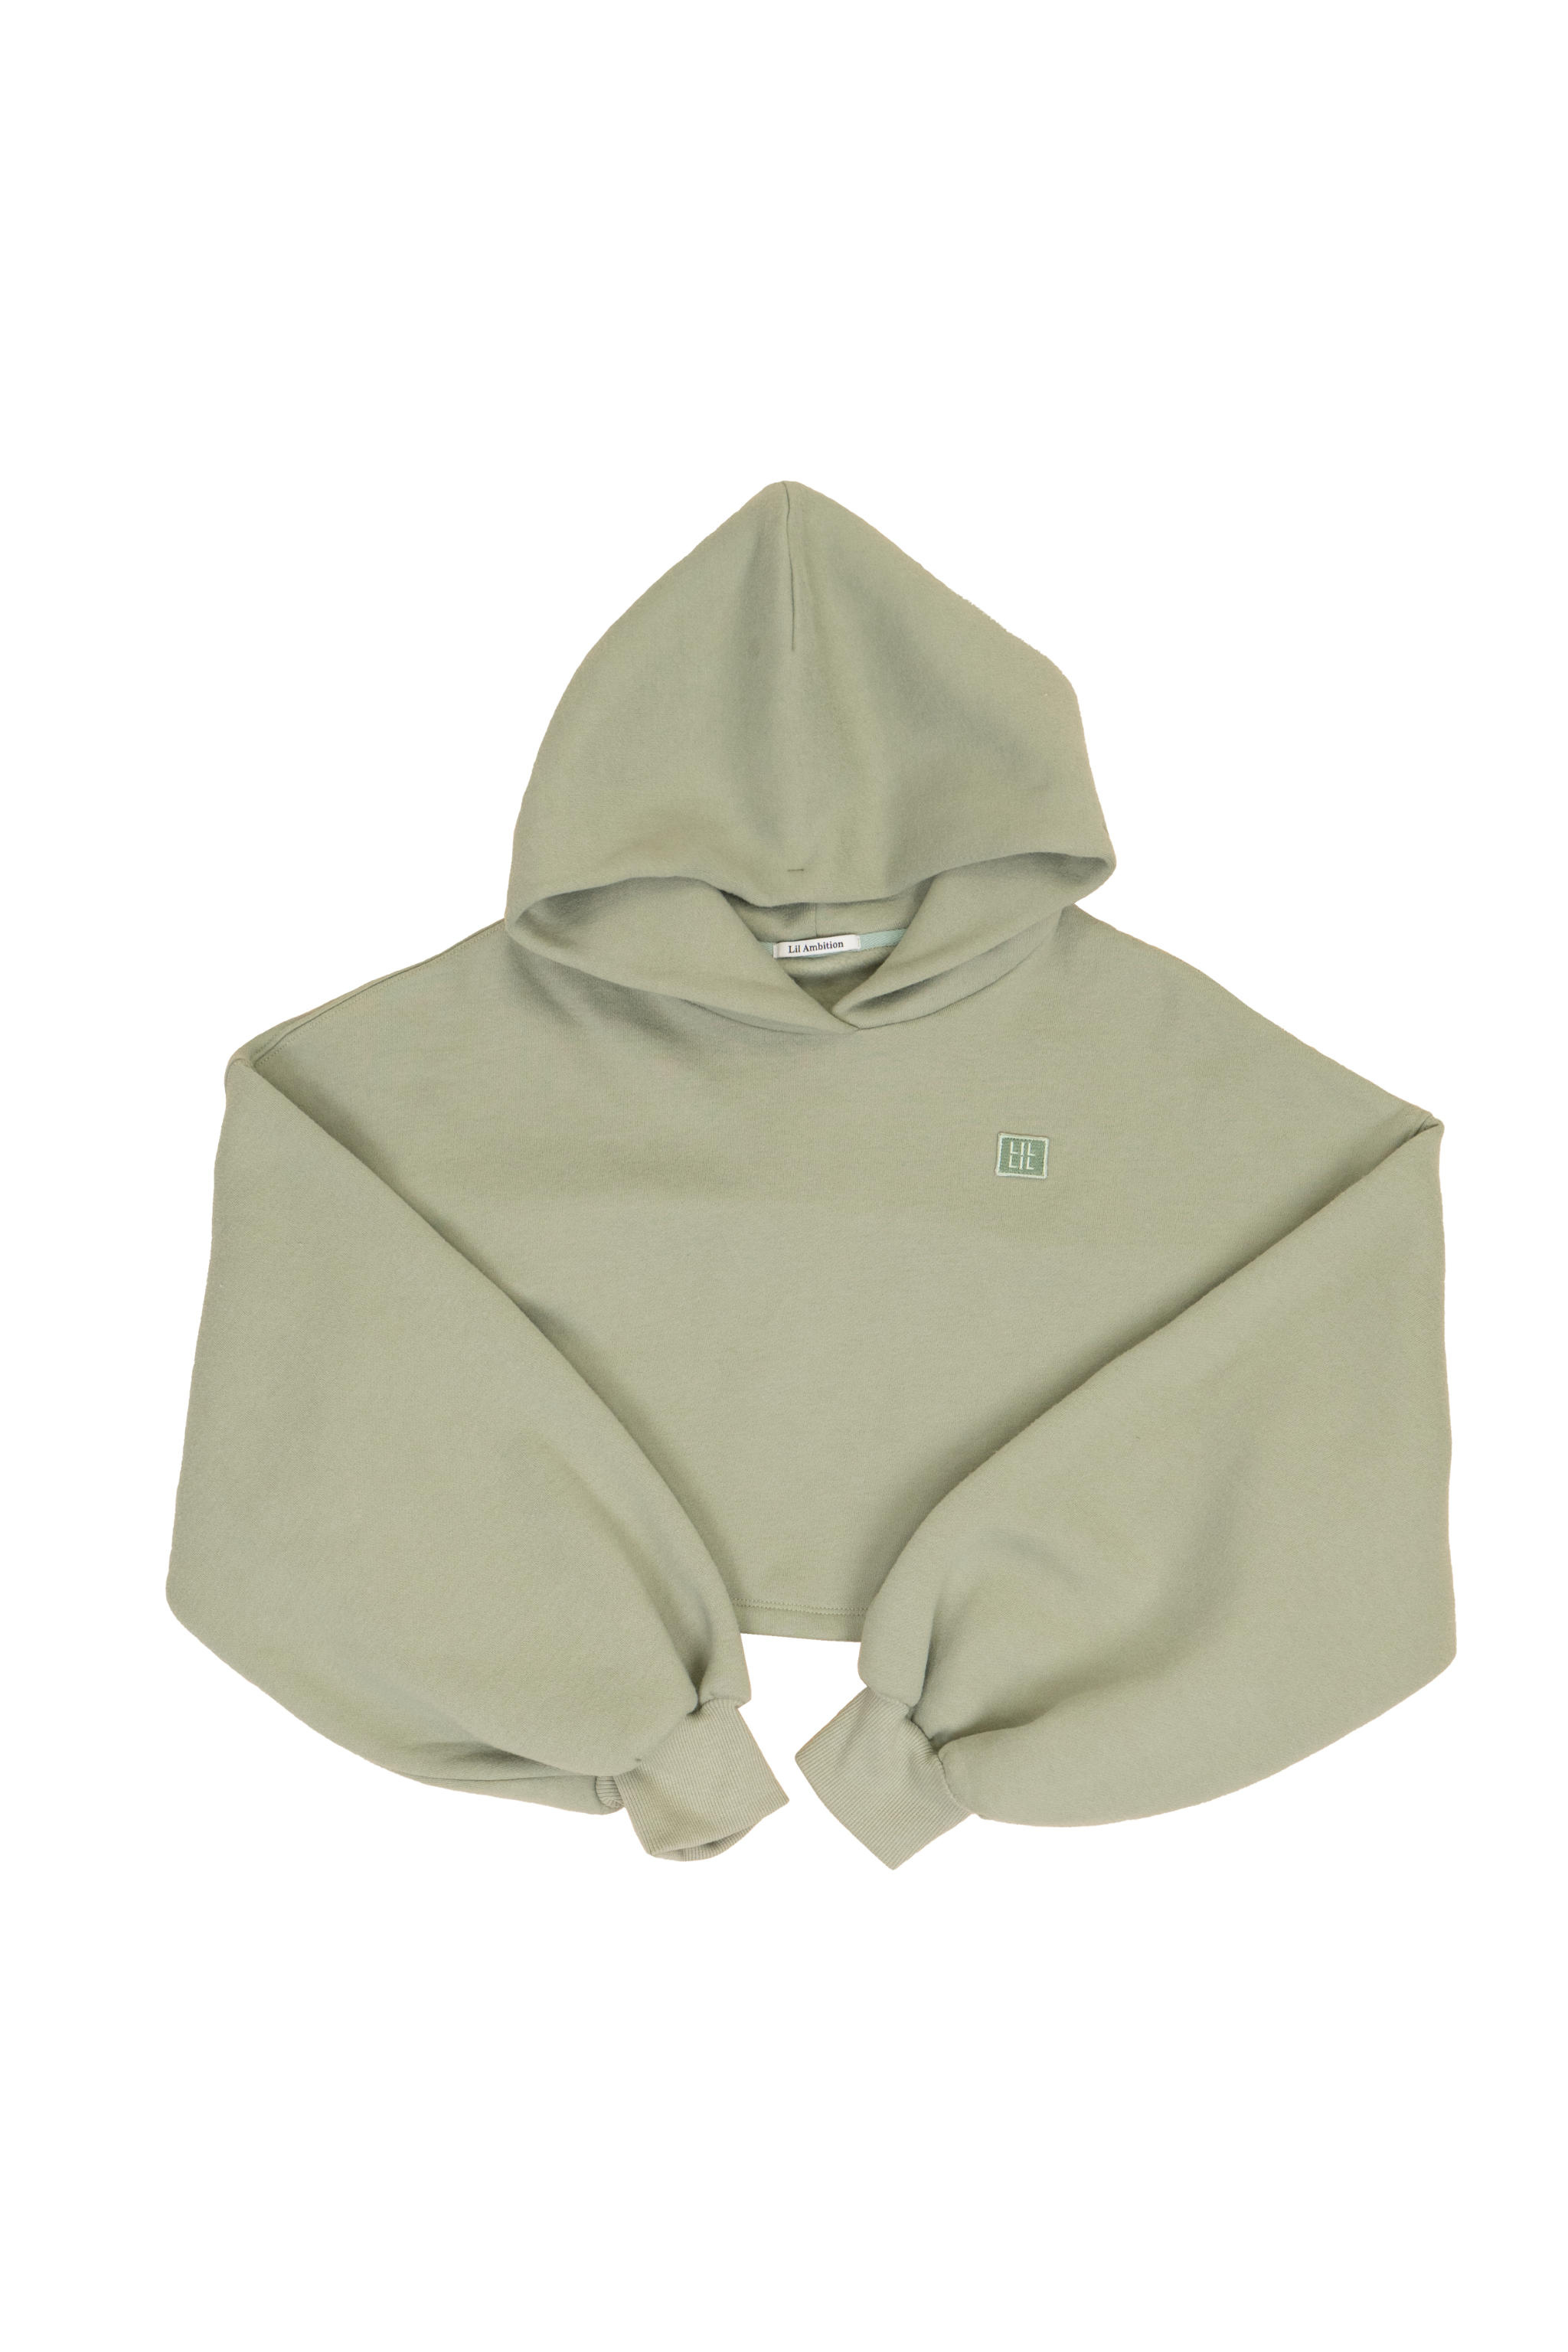 Lil Ambition リルアンビション　Lil Wappen Hoodie